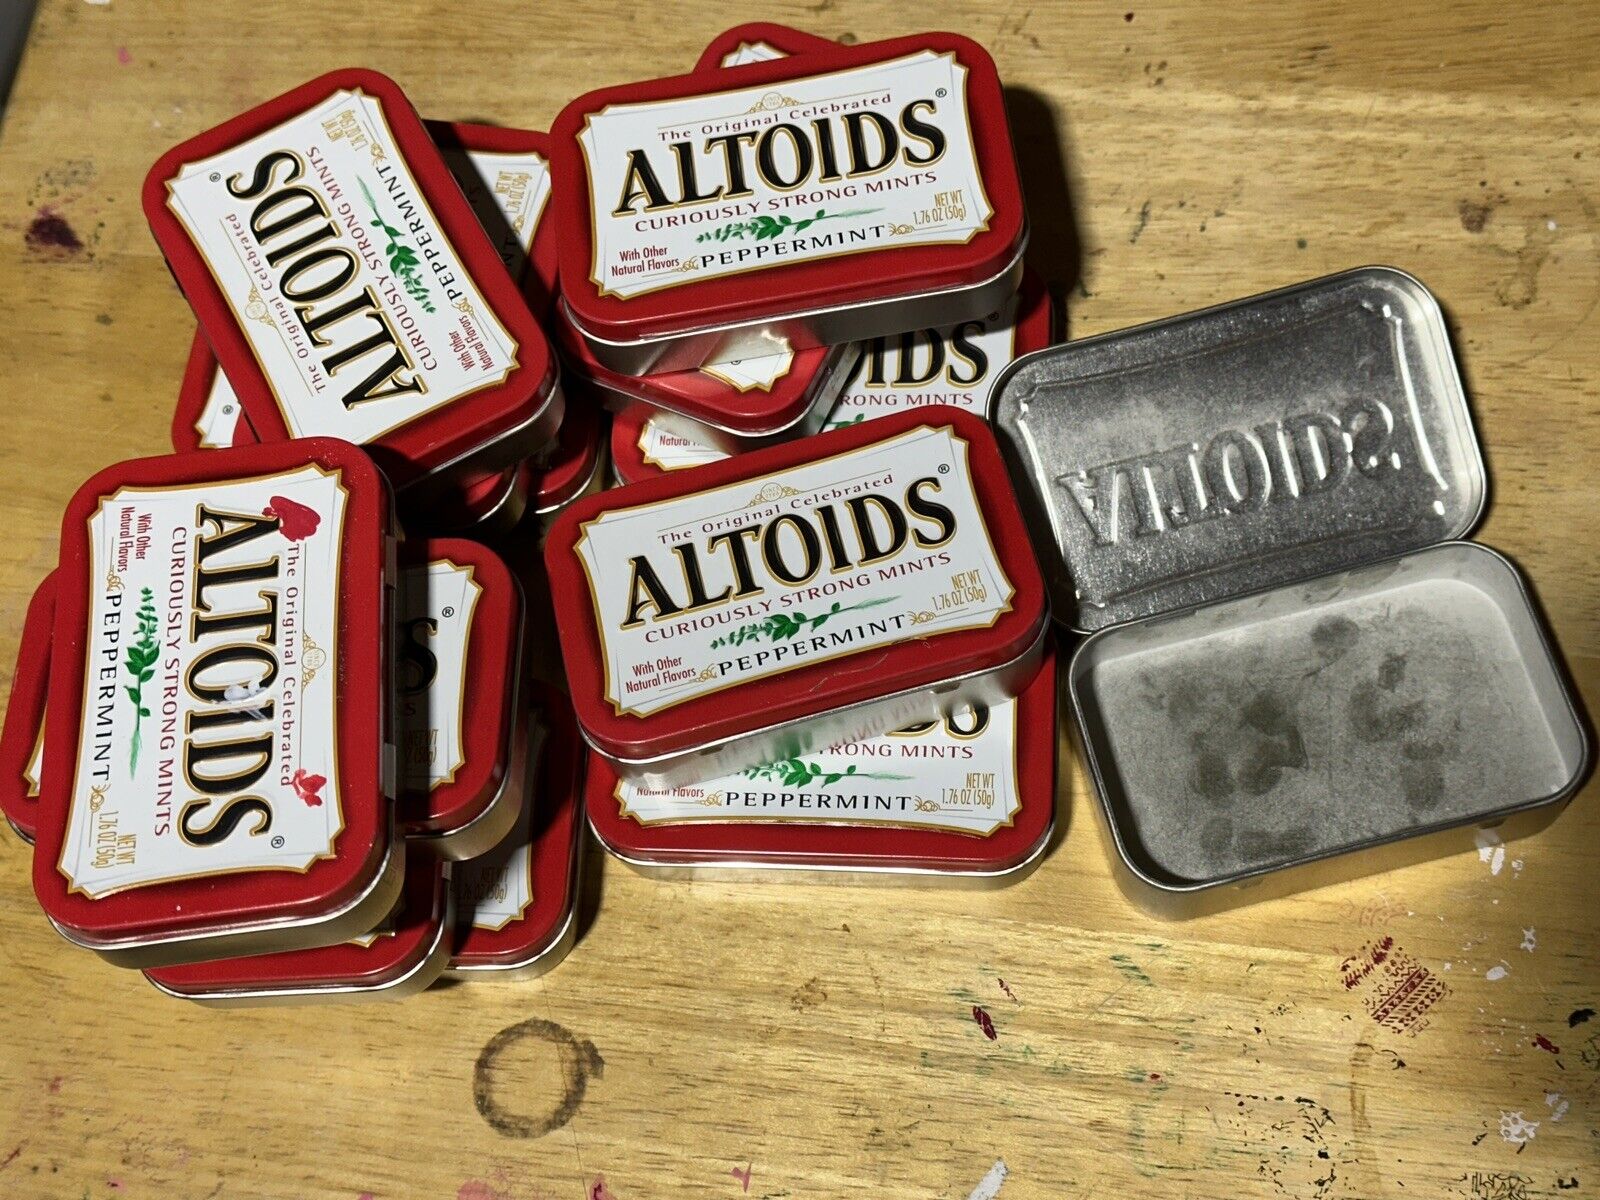 25 Altoids Tins - Empty - Red - Fishing Sewing Geocaching Crafts